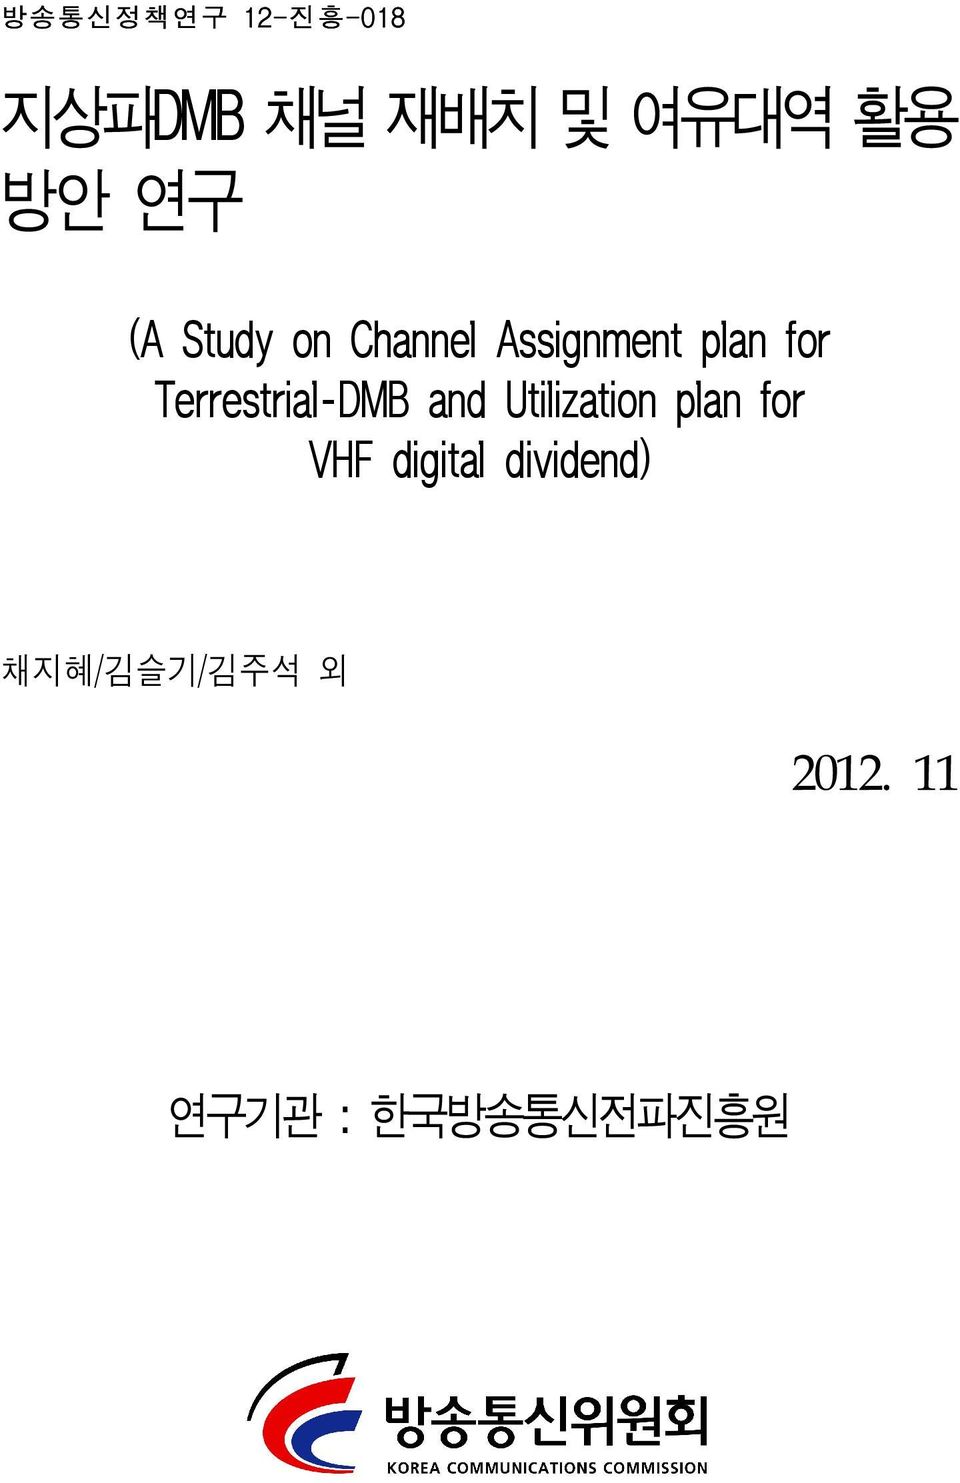 Terrestrial-DMB and Utilization plan for VHF